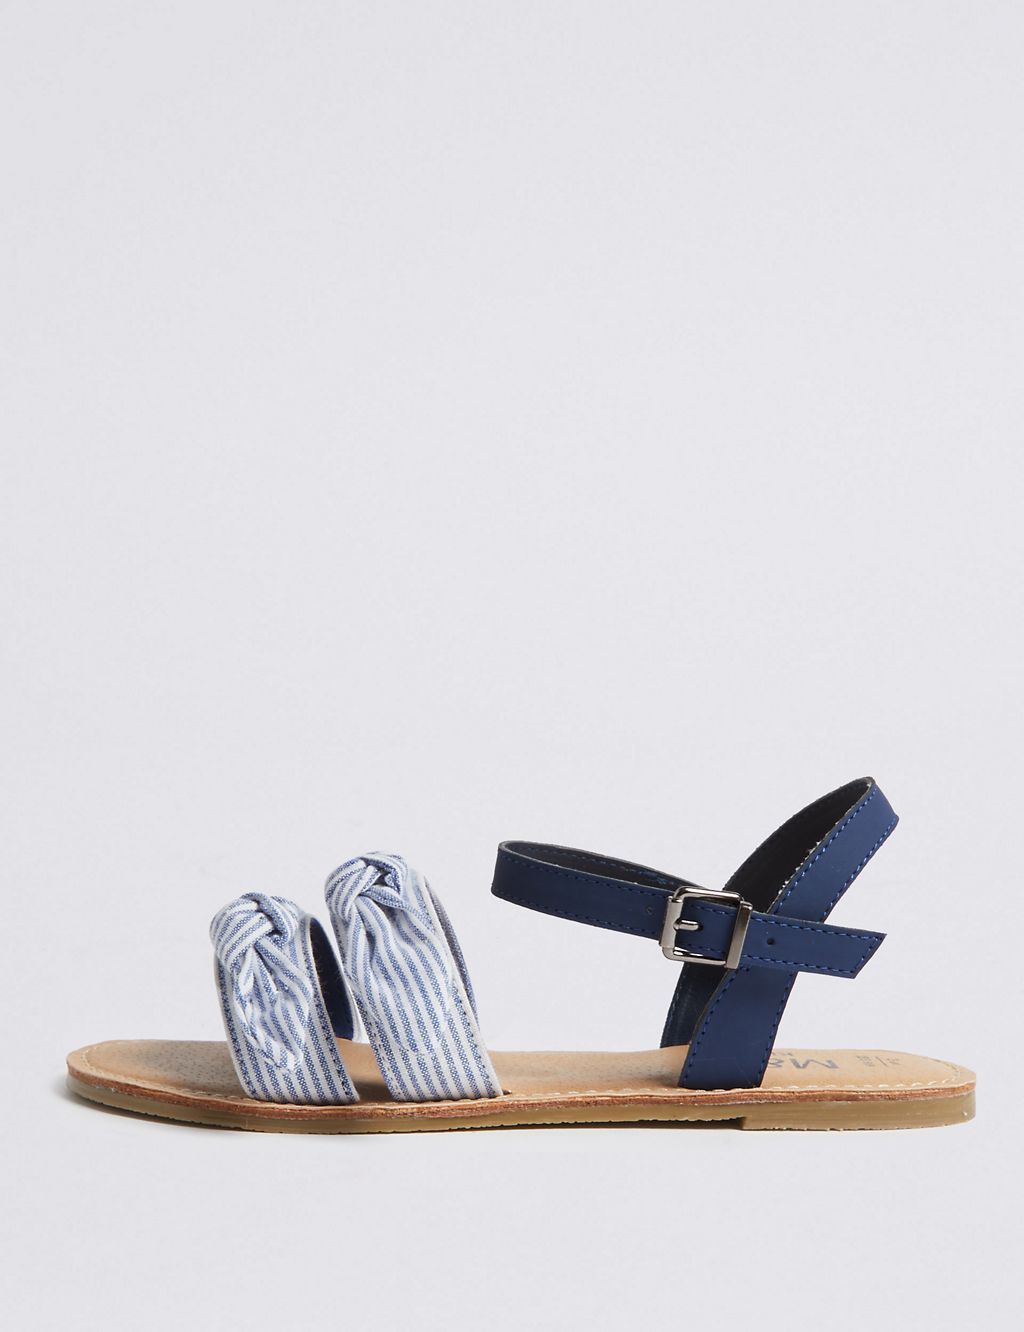 Kids’ Bow Sandals (13 Small - 6 Large) 2 of 5